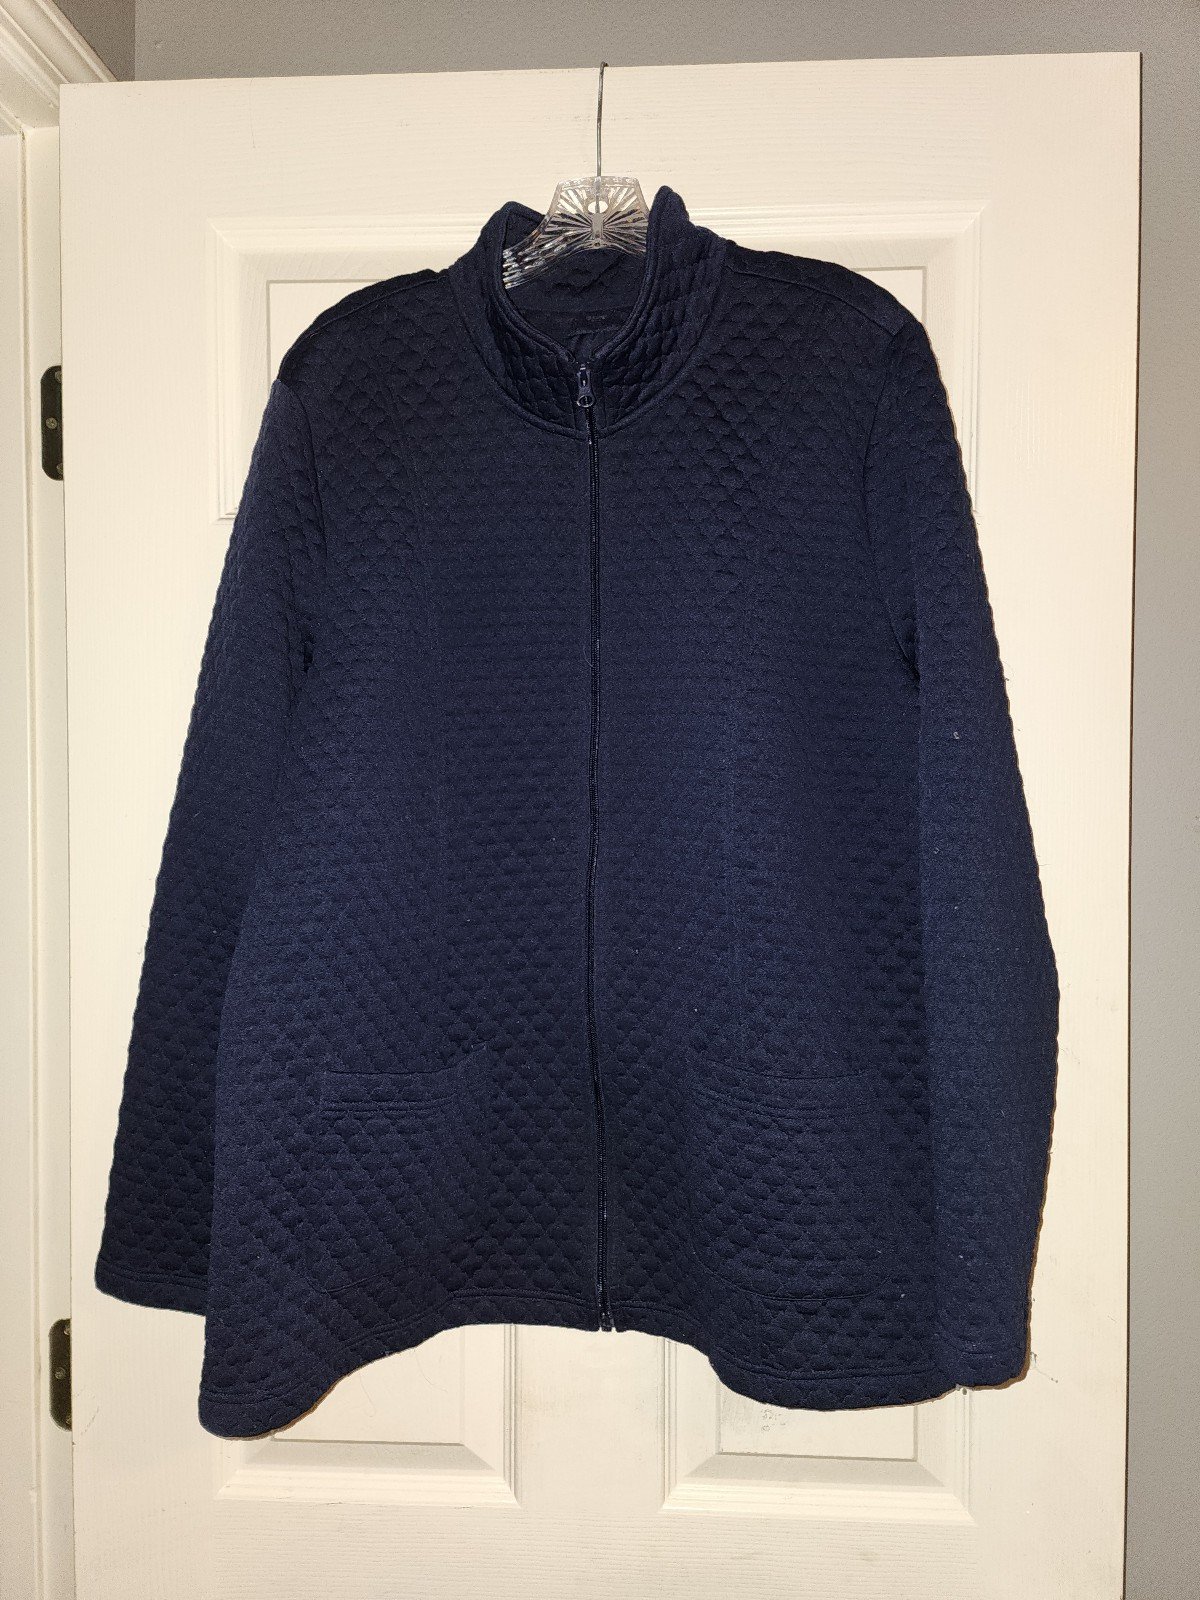 High quality Basic Editions zip up jacket navy blue wom